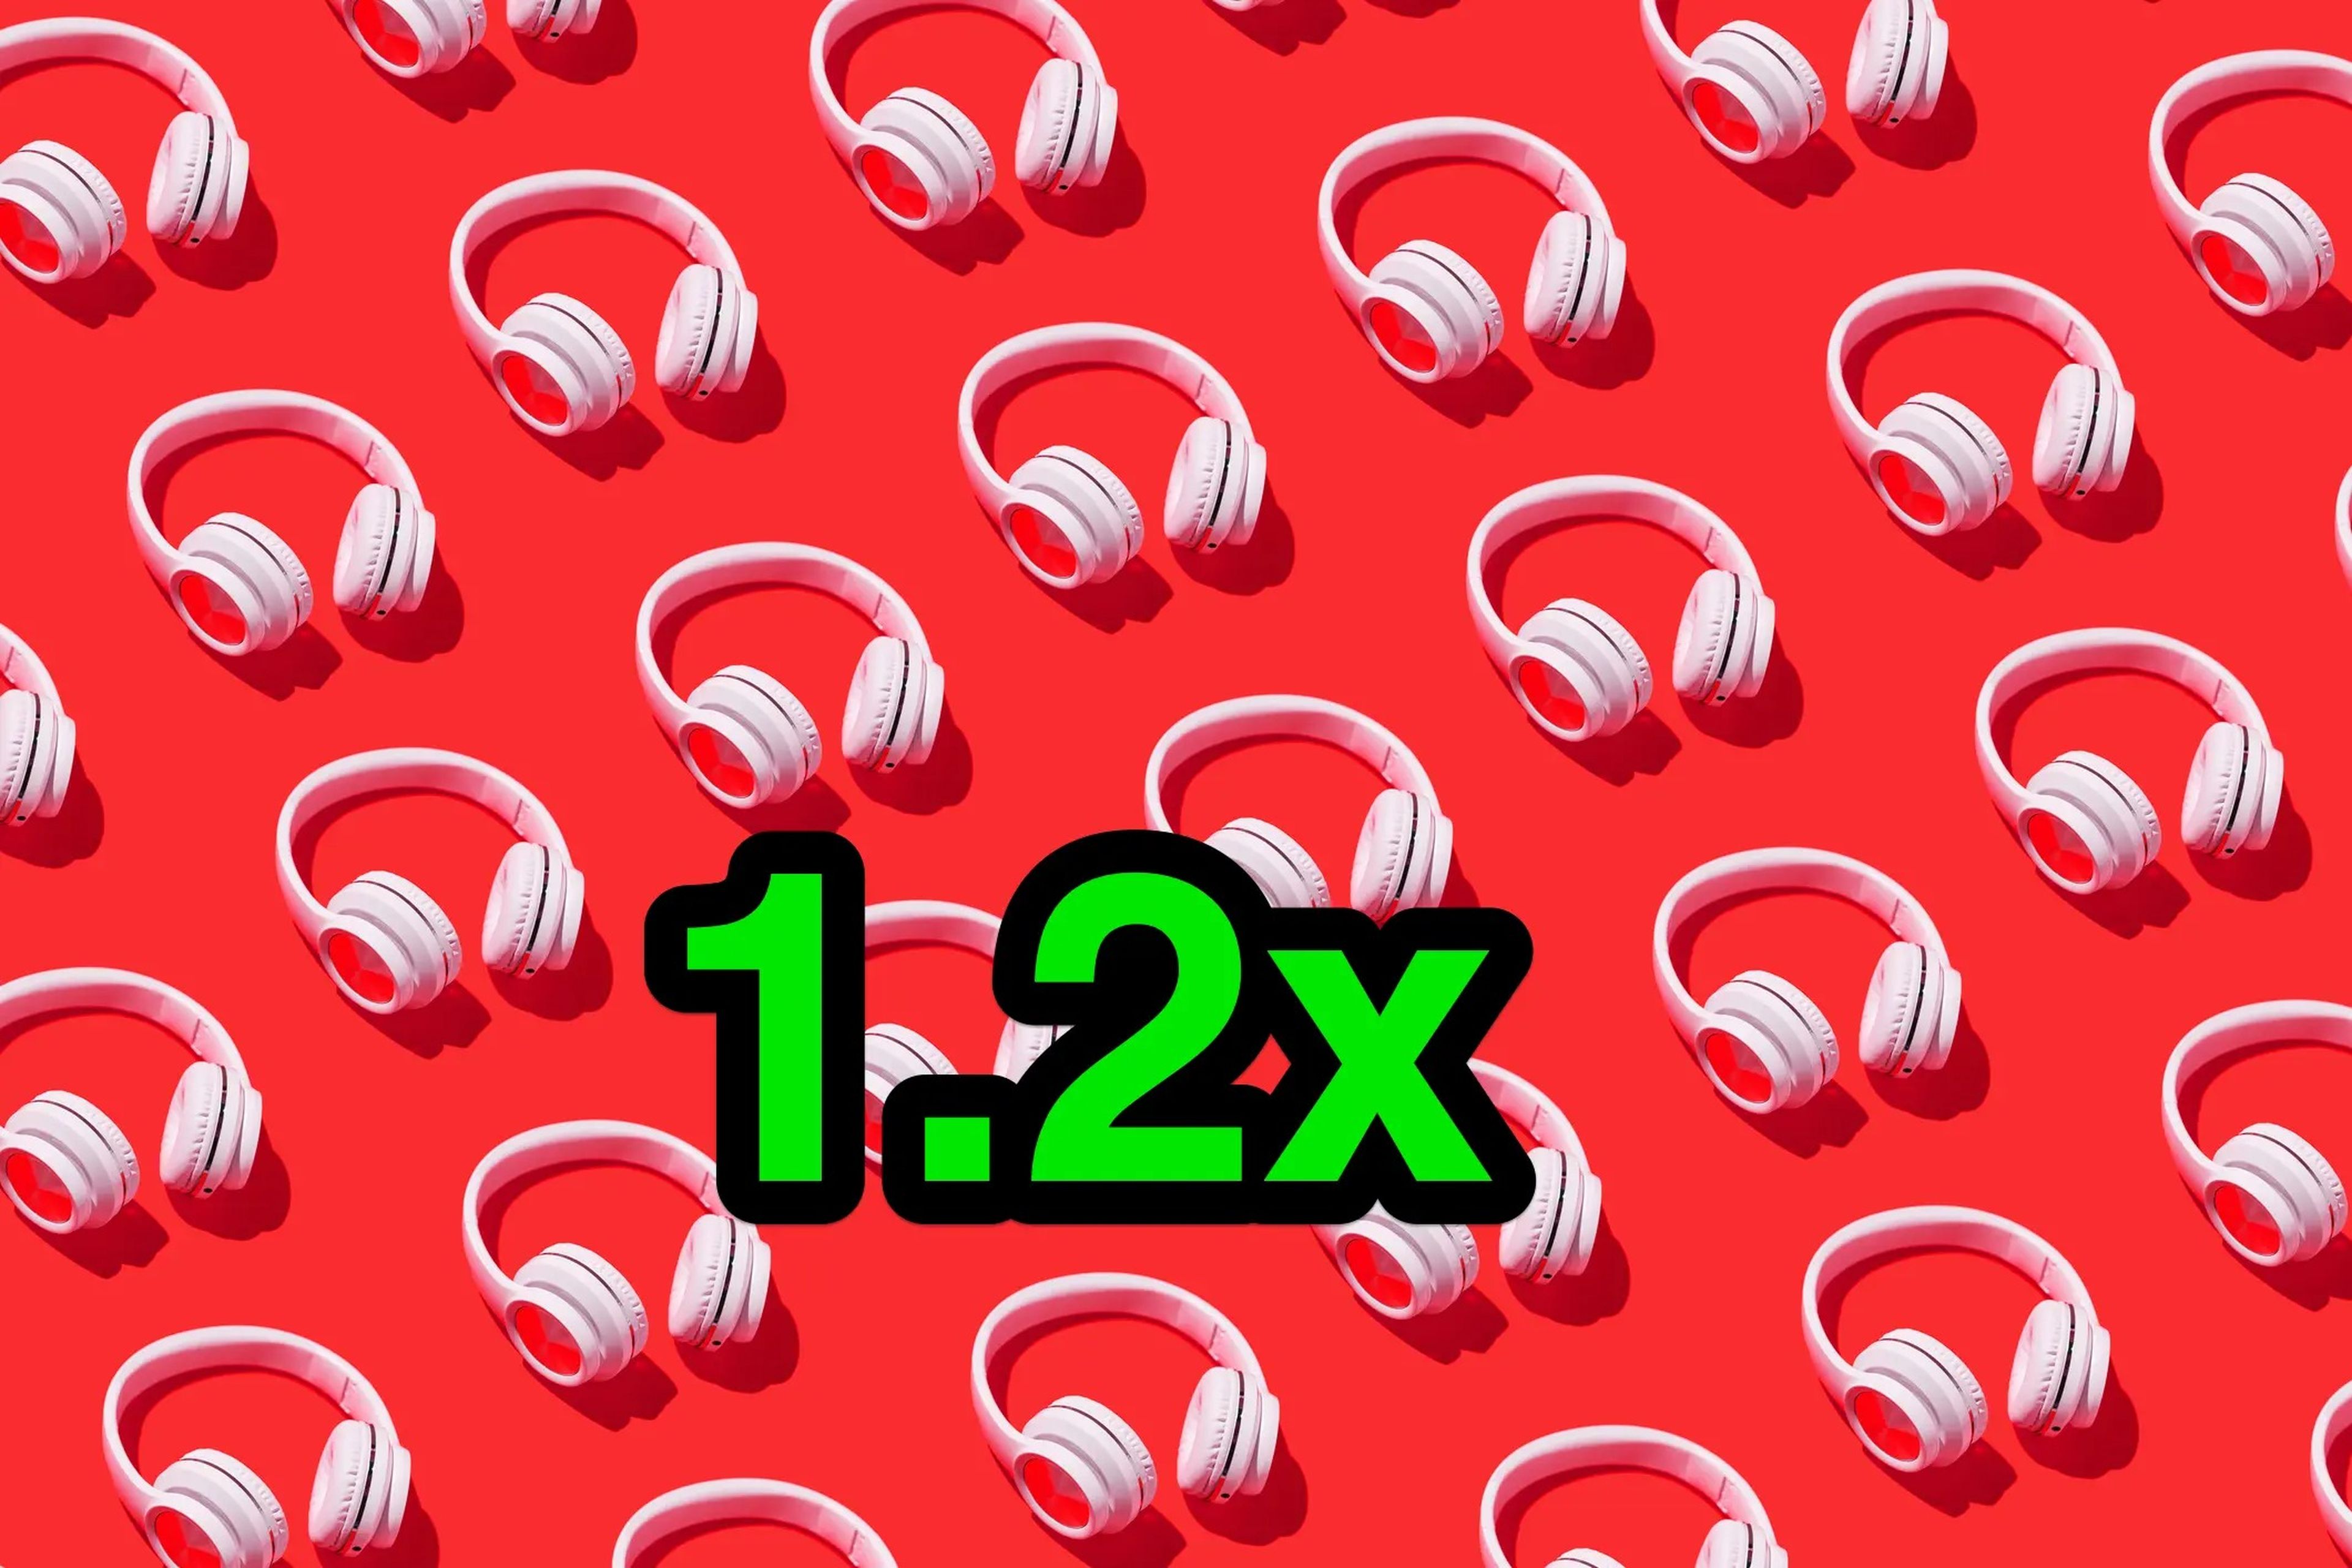 headphones and the number 1.2x